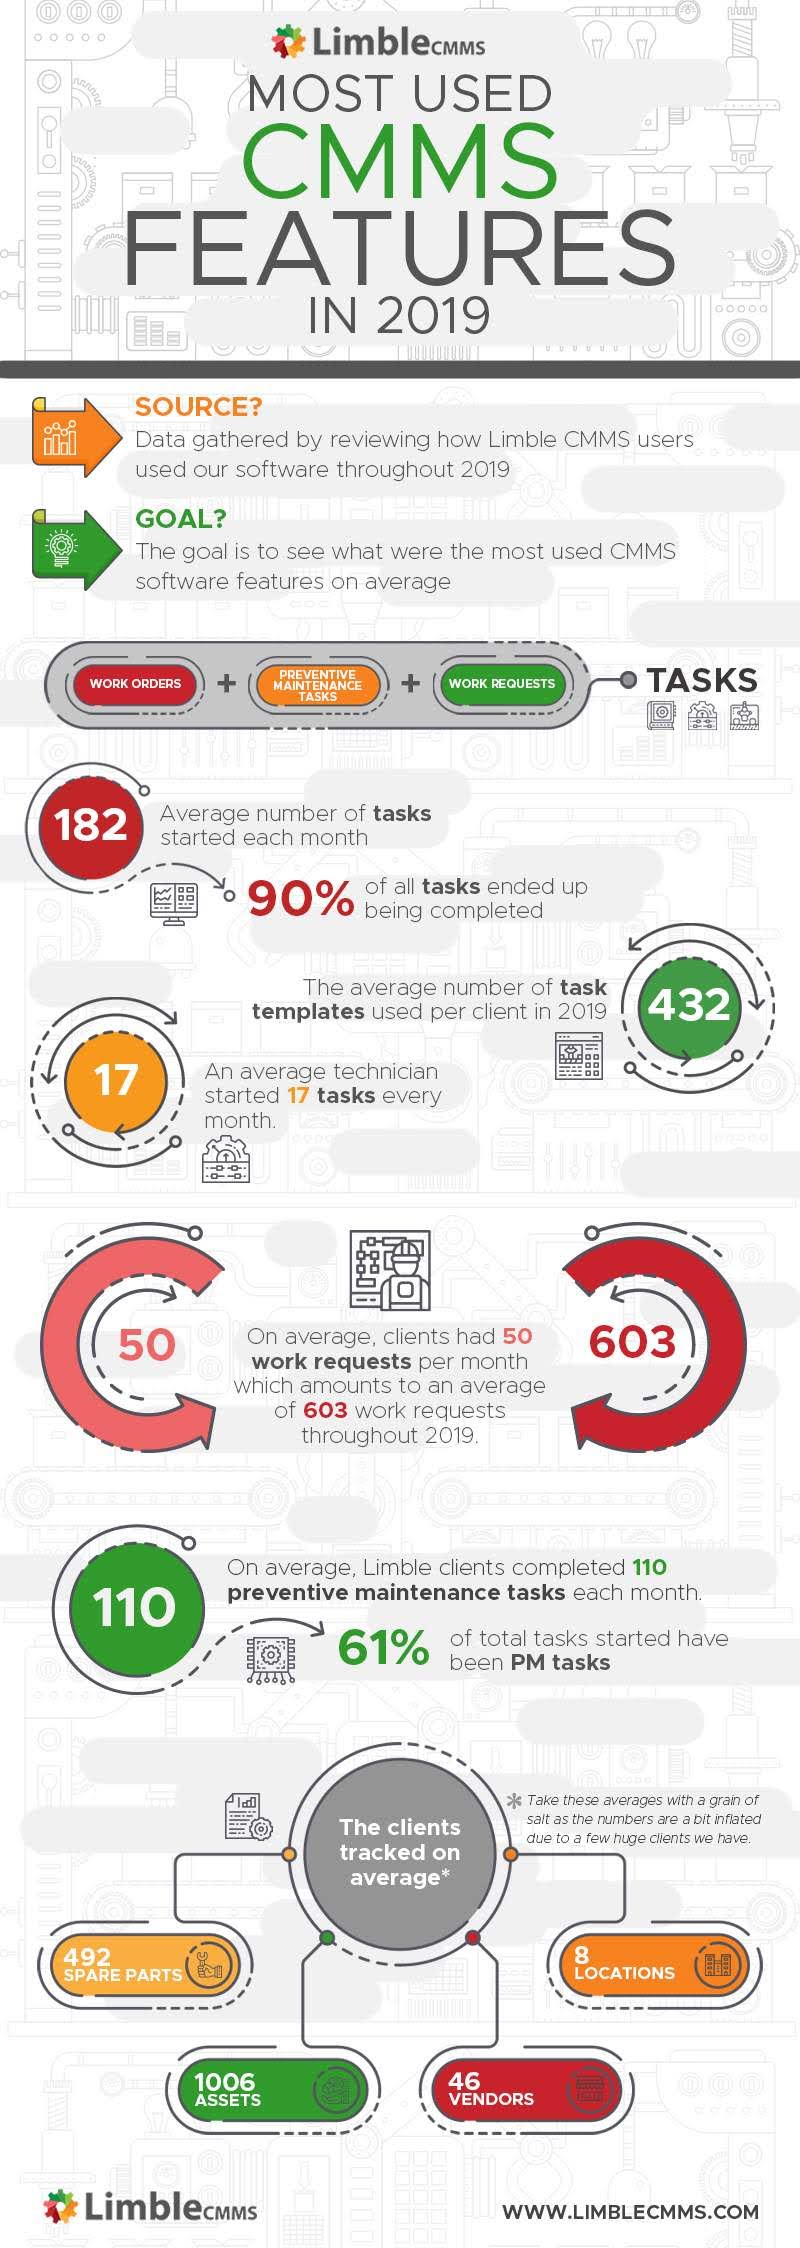 Top CMMS Features And How They Were Used In 2019 #infographic